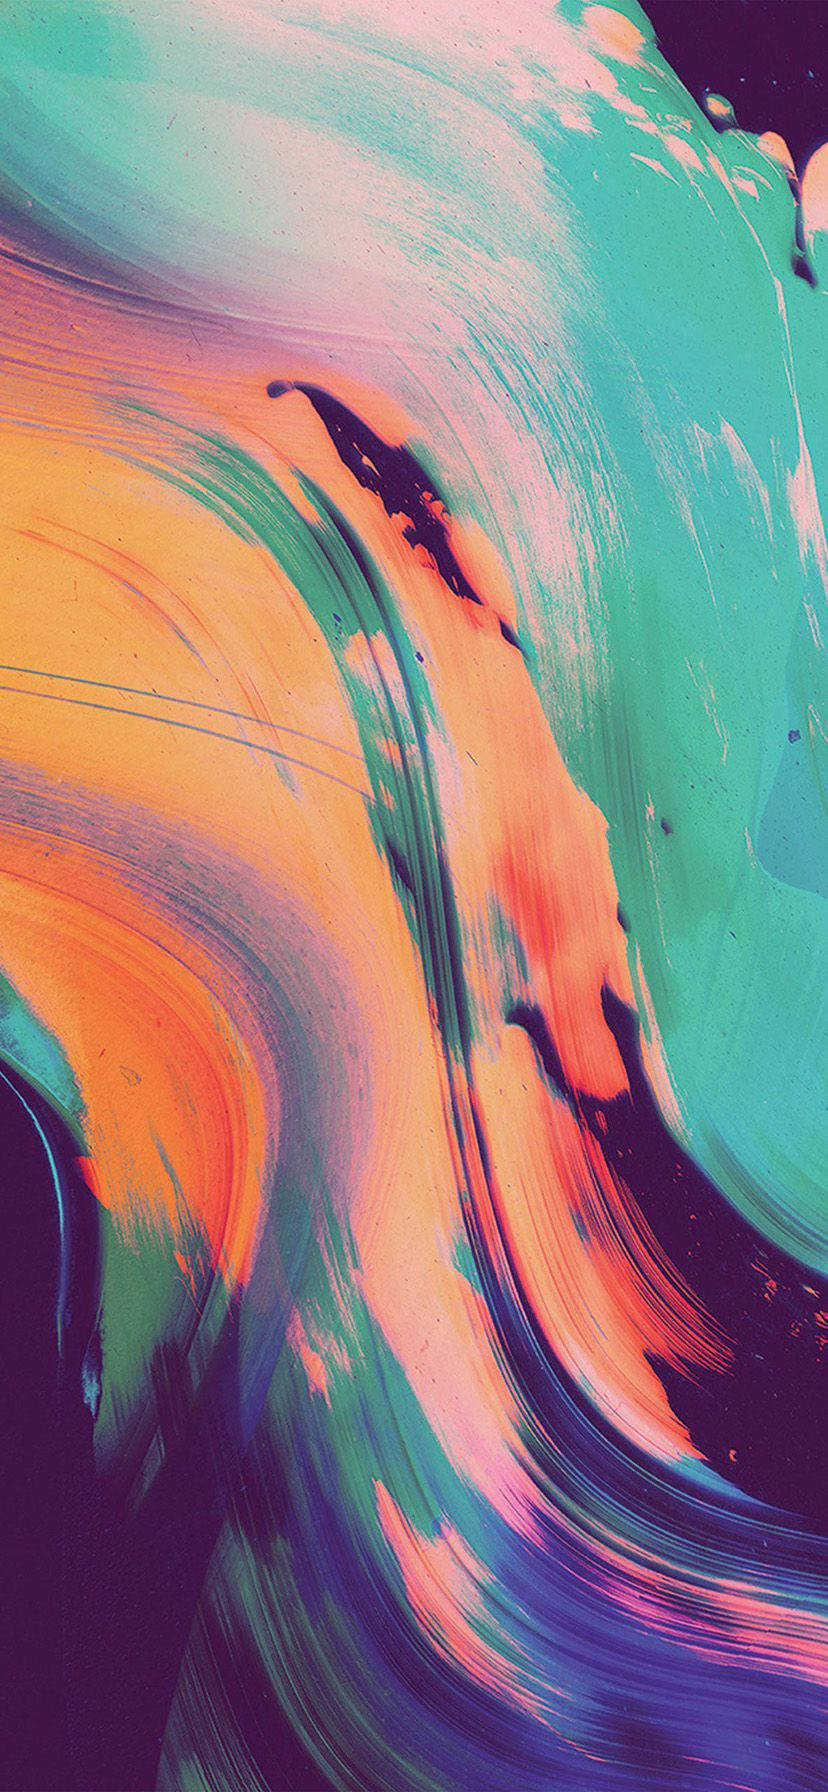 Colorful Abstract Artwork on an iPhone XR Wallpaper